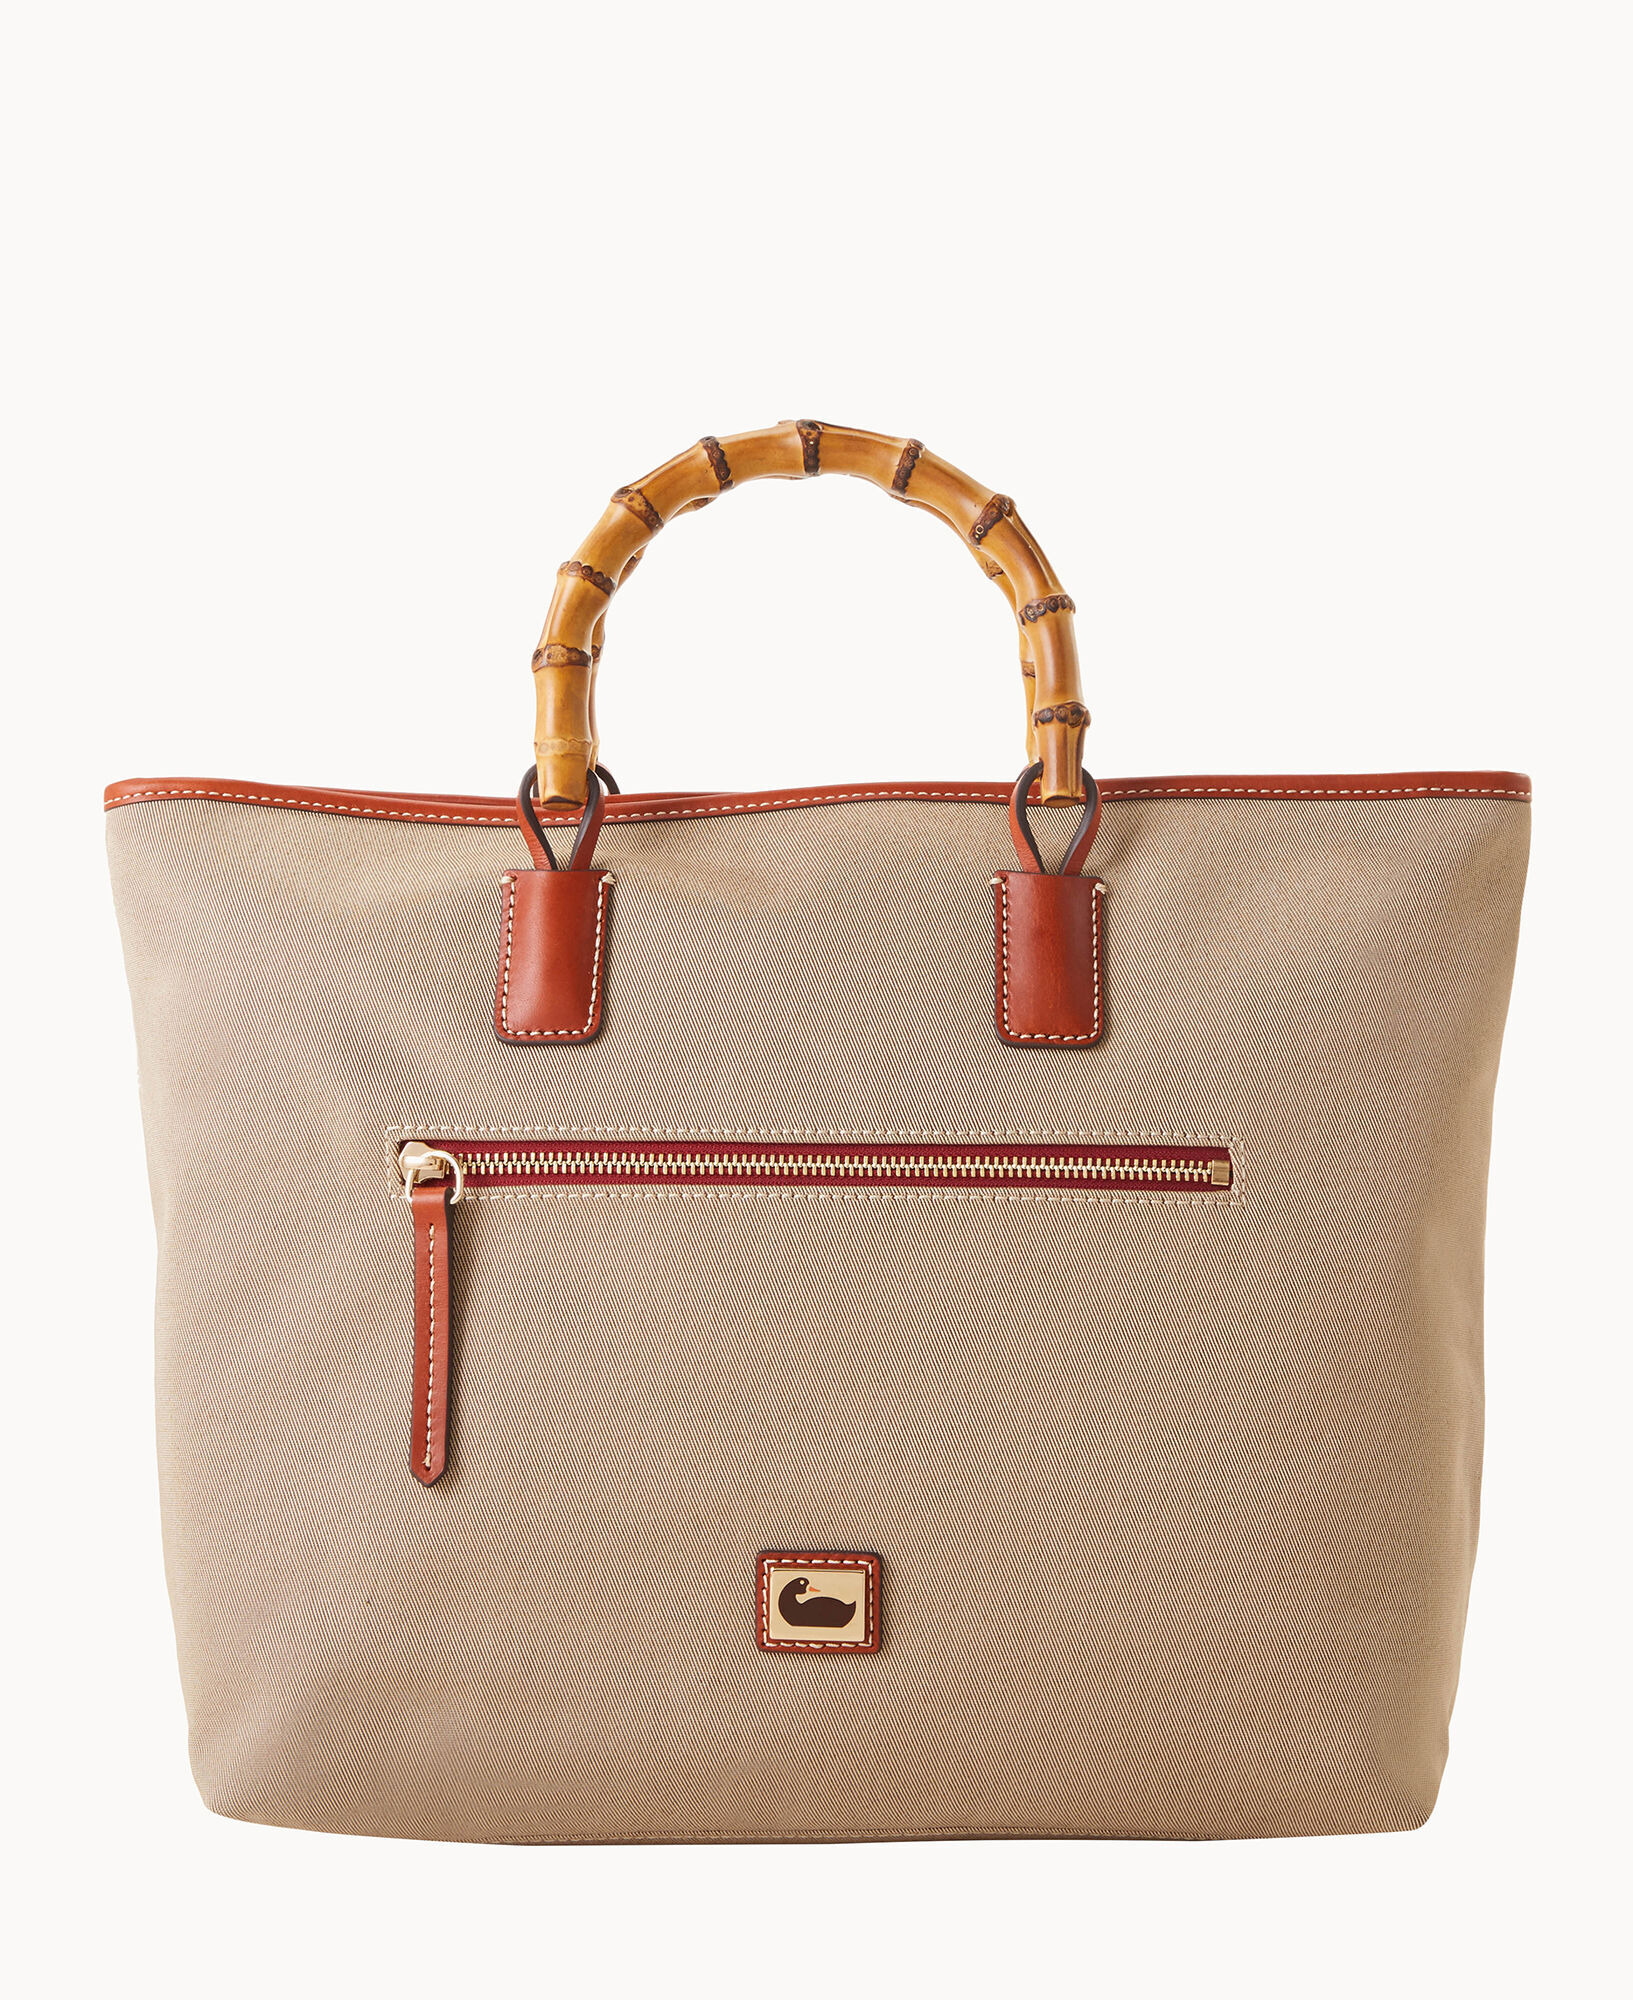 Who else loves Dooney & Bourke? Well your in good company